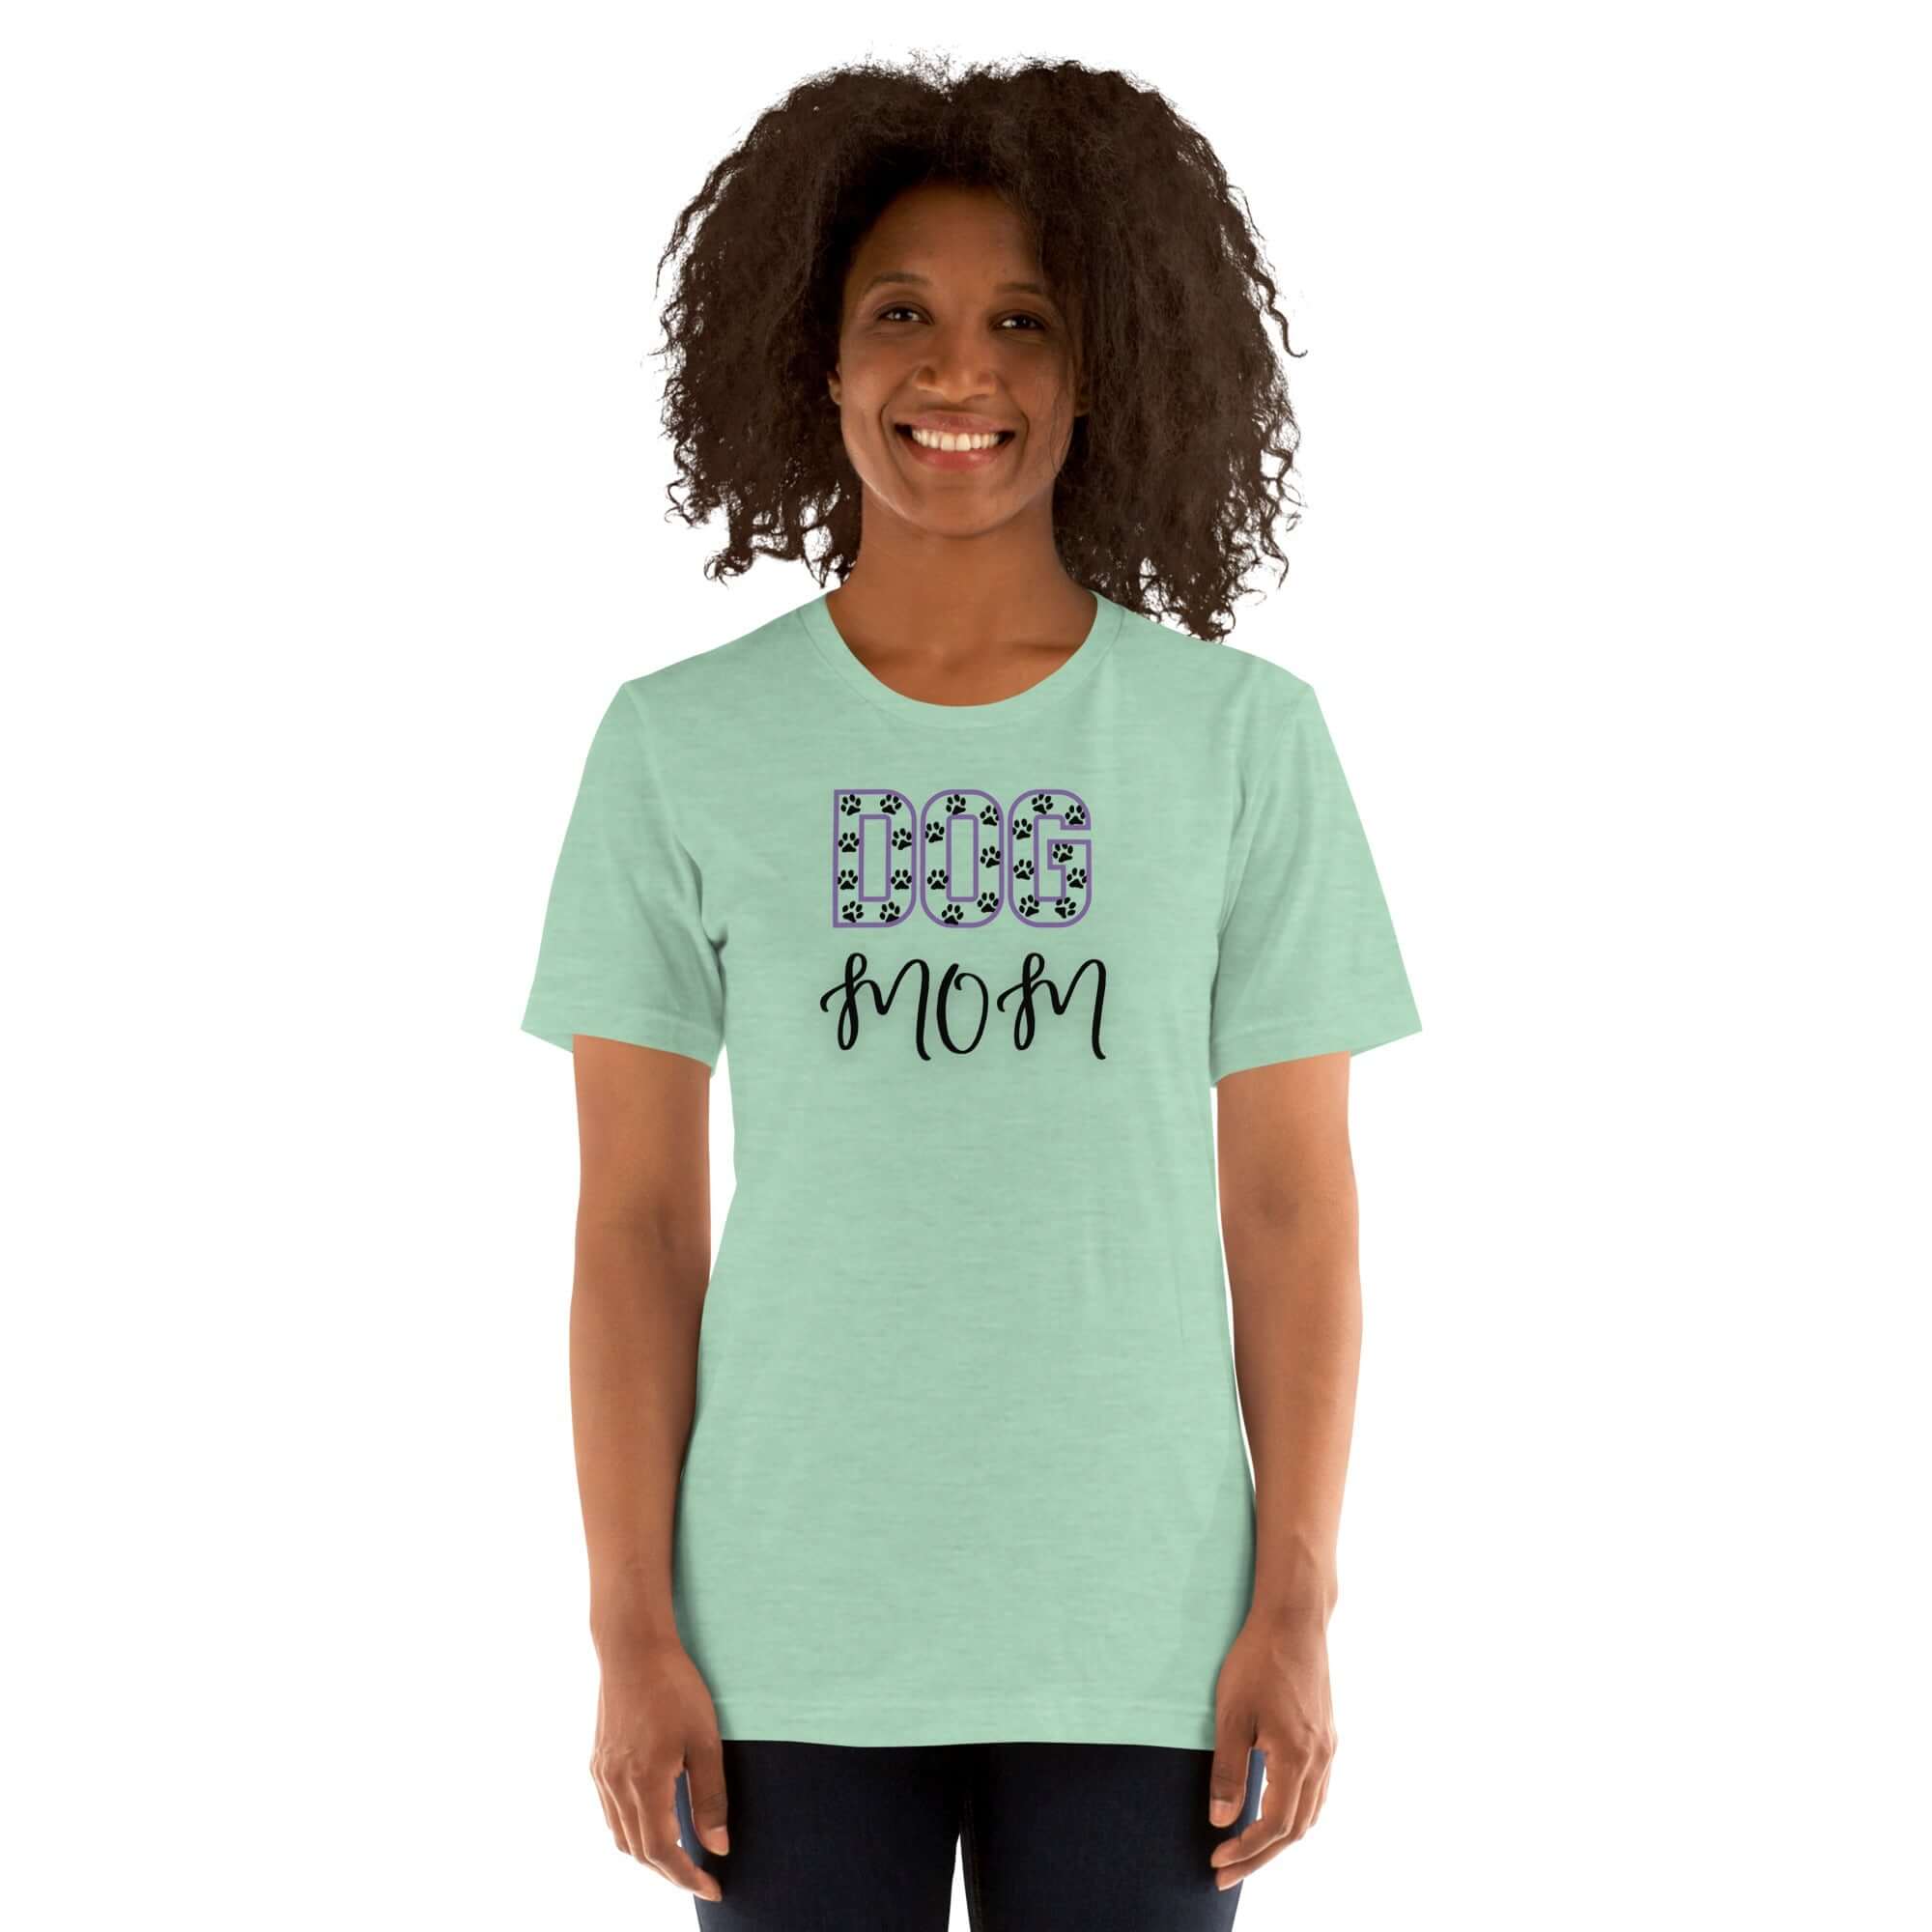 Paw Print Dog Mom T-Shirt - TAILWAGS UNLIMITED